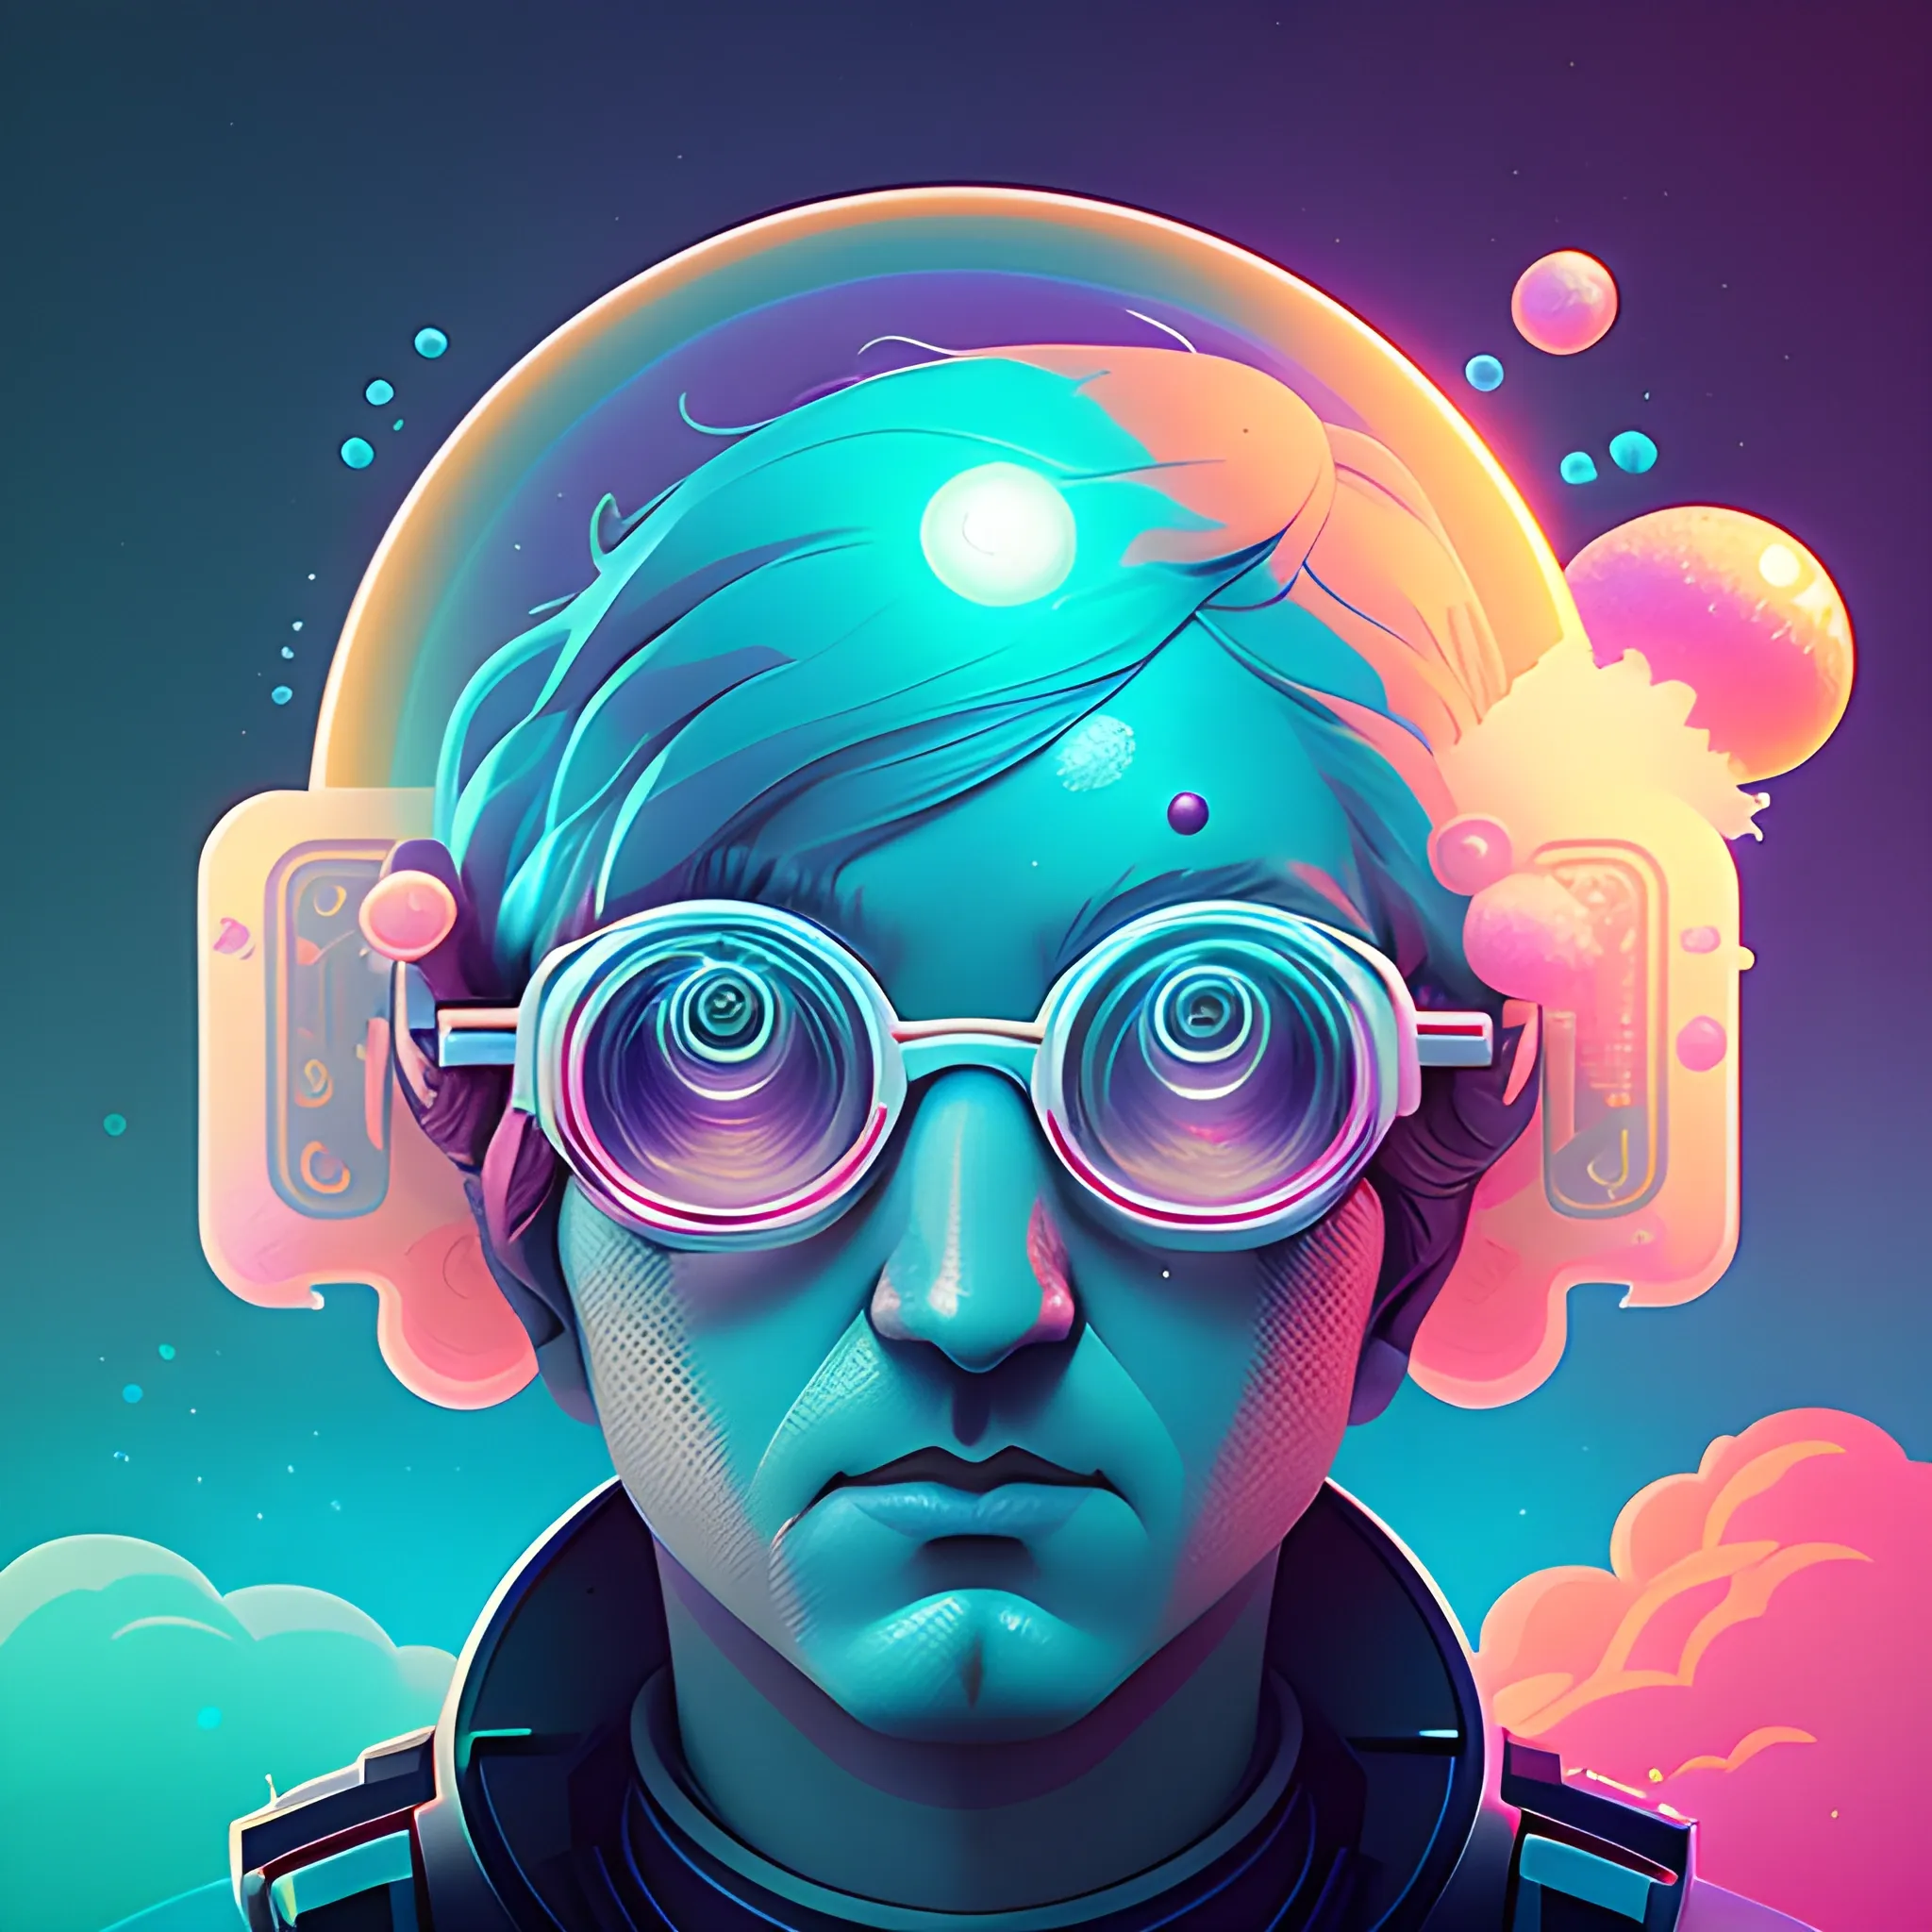 Government AI avatar by petros afshar, ross tran, Tom Bagshaw, tom whalen, underwater bubbly psychedelic clouds, Anaglyph 3D lens blur effect